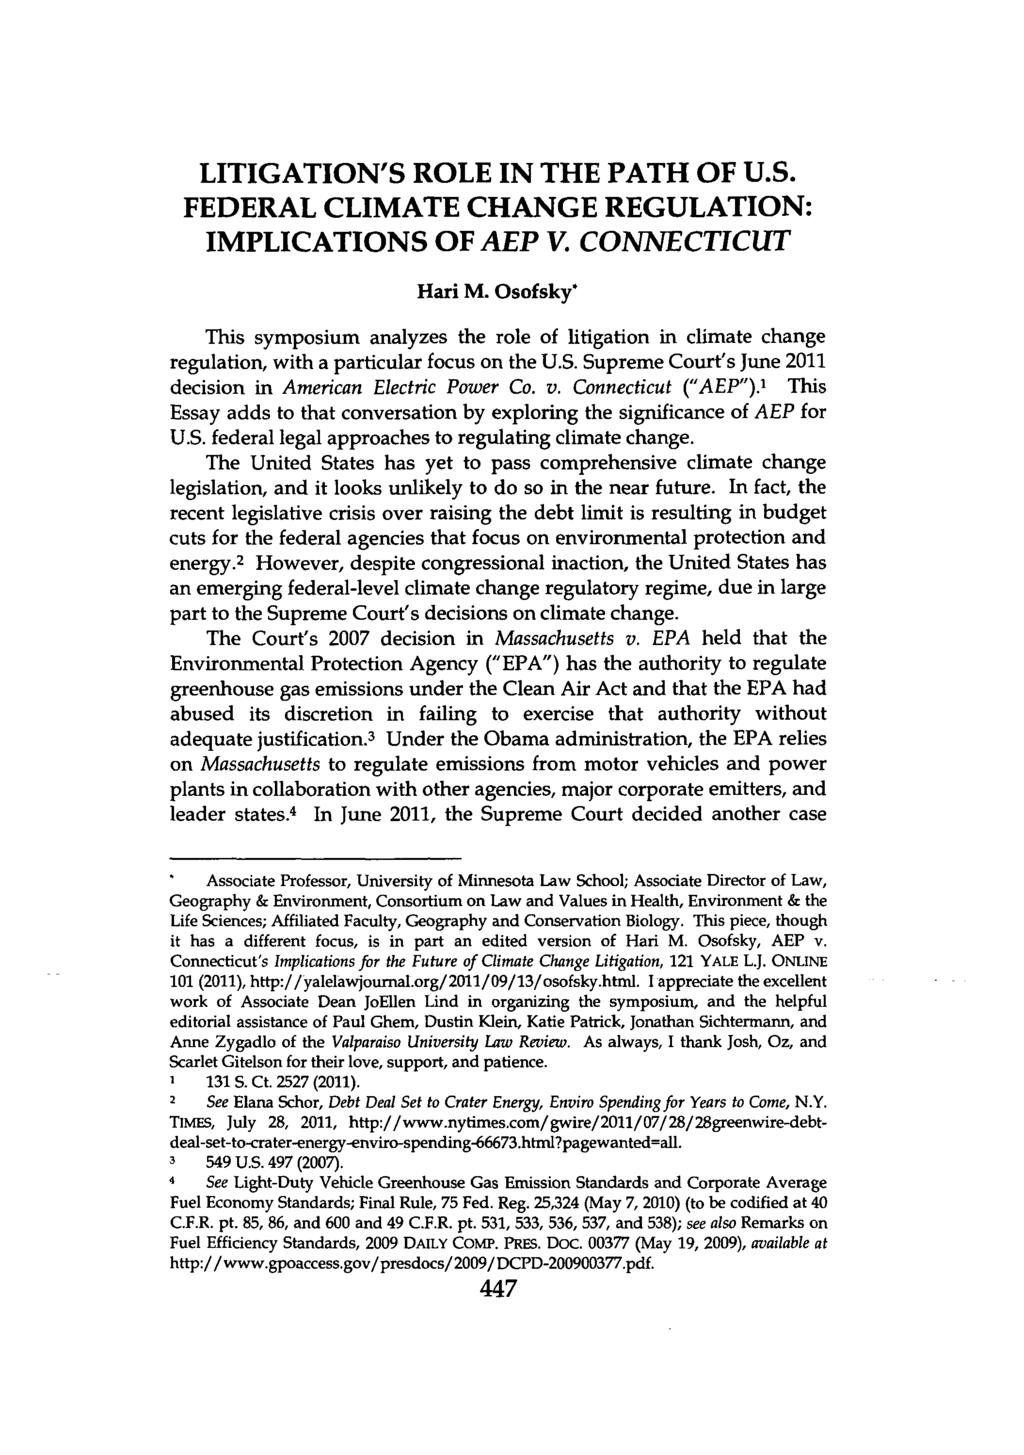 LITIGATION'S ROLE IN THE PATH OF U.S. FEDERAL CLIMATE CHANGE REGULATION: IMPLICATIONS OF AEP V. CONNECTICUT Hari M.